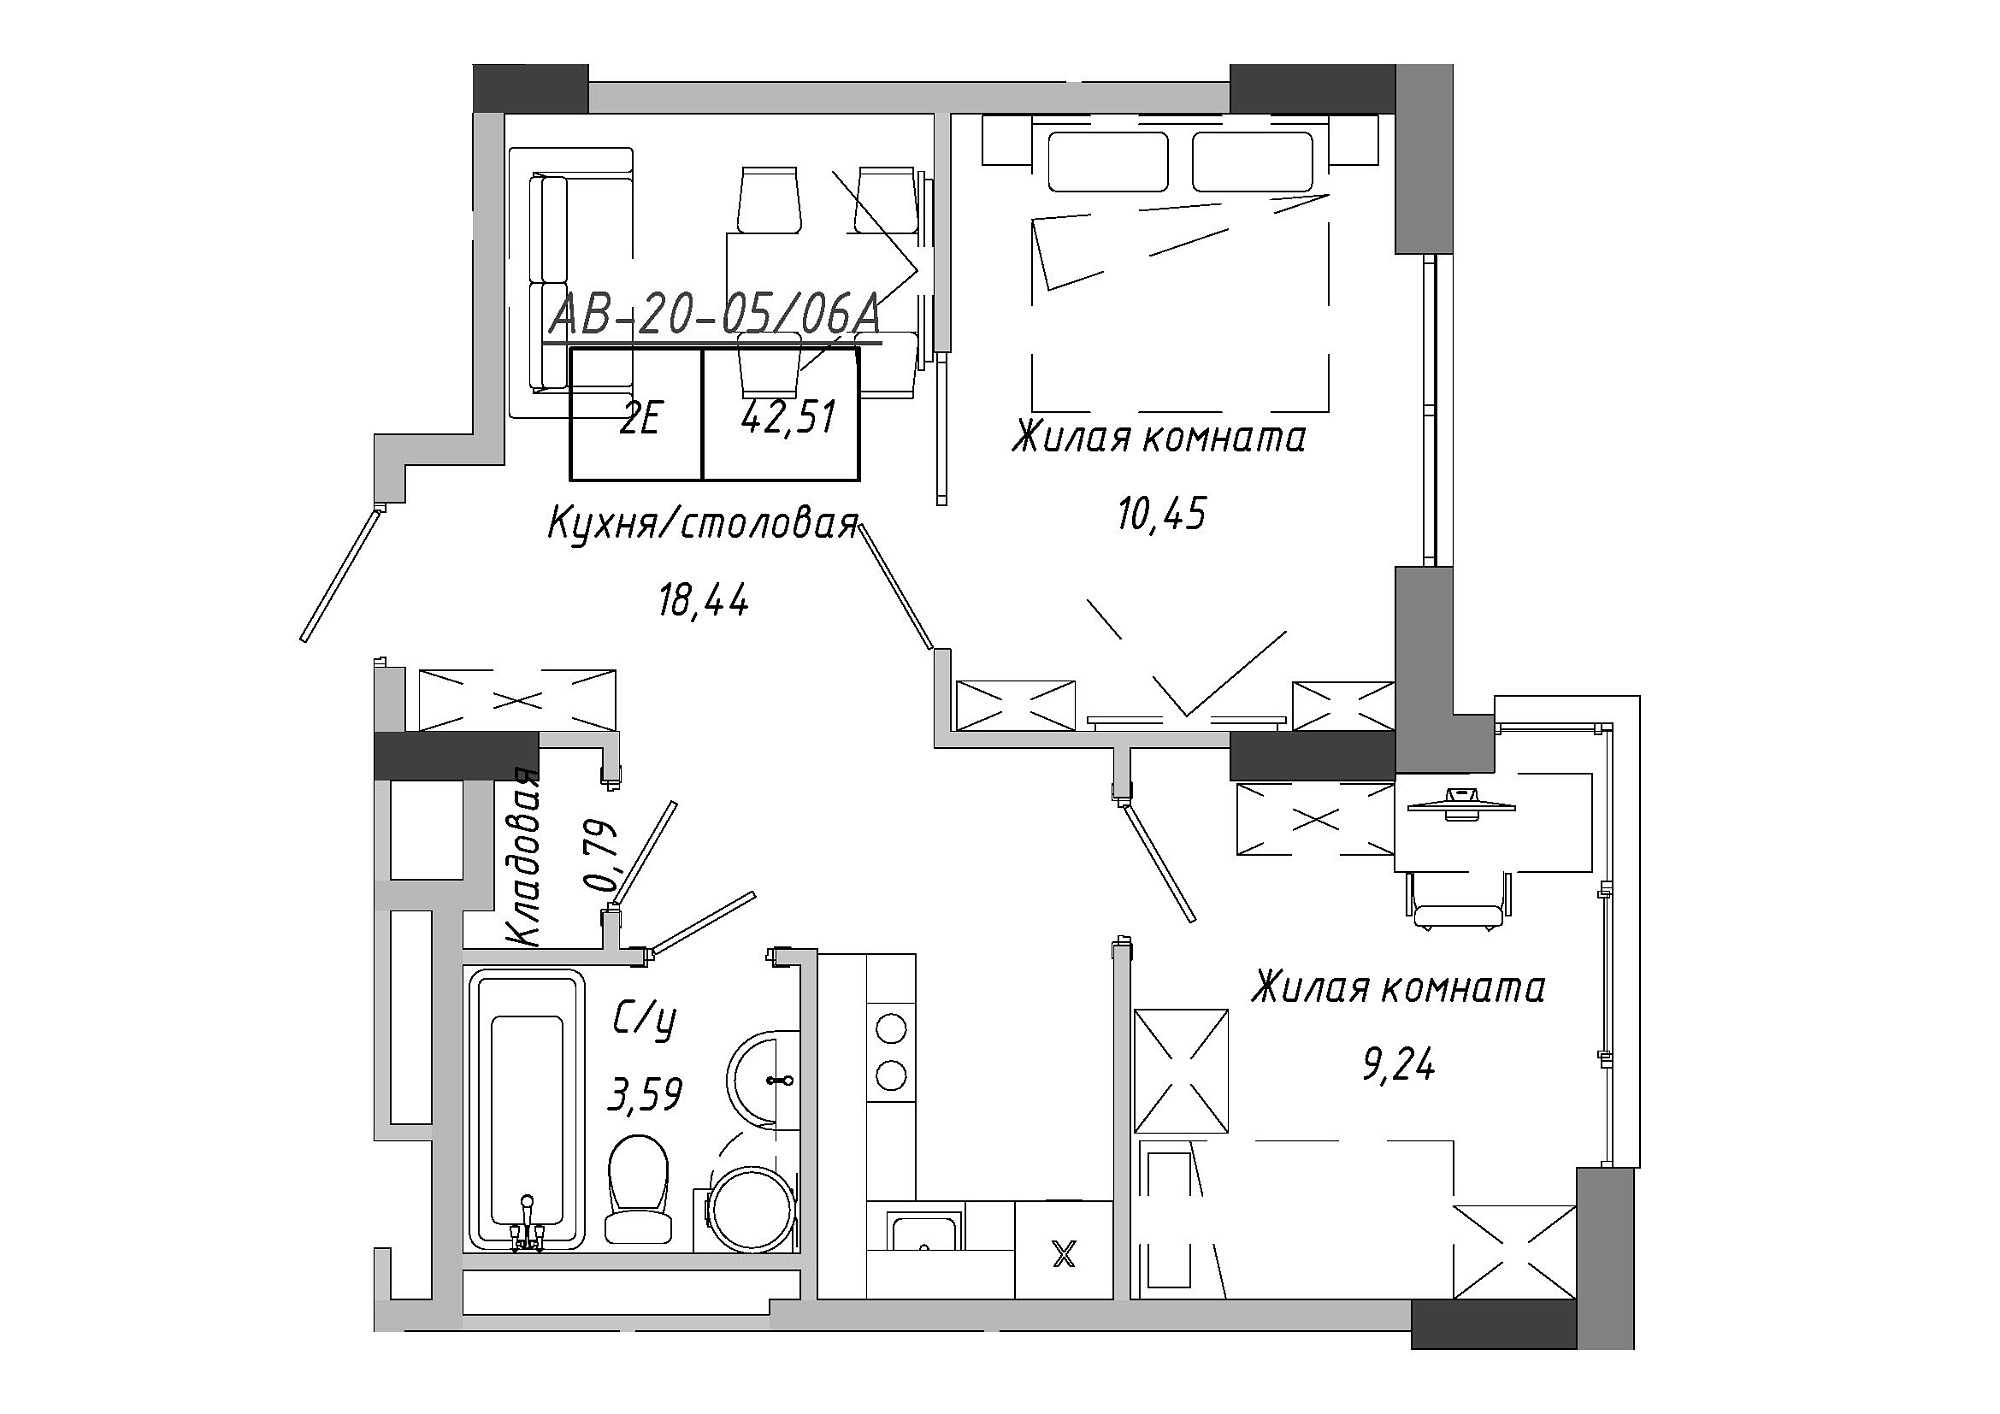 Planning 2-rm flats area 42.85m2, AB-20-05/0006а.